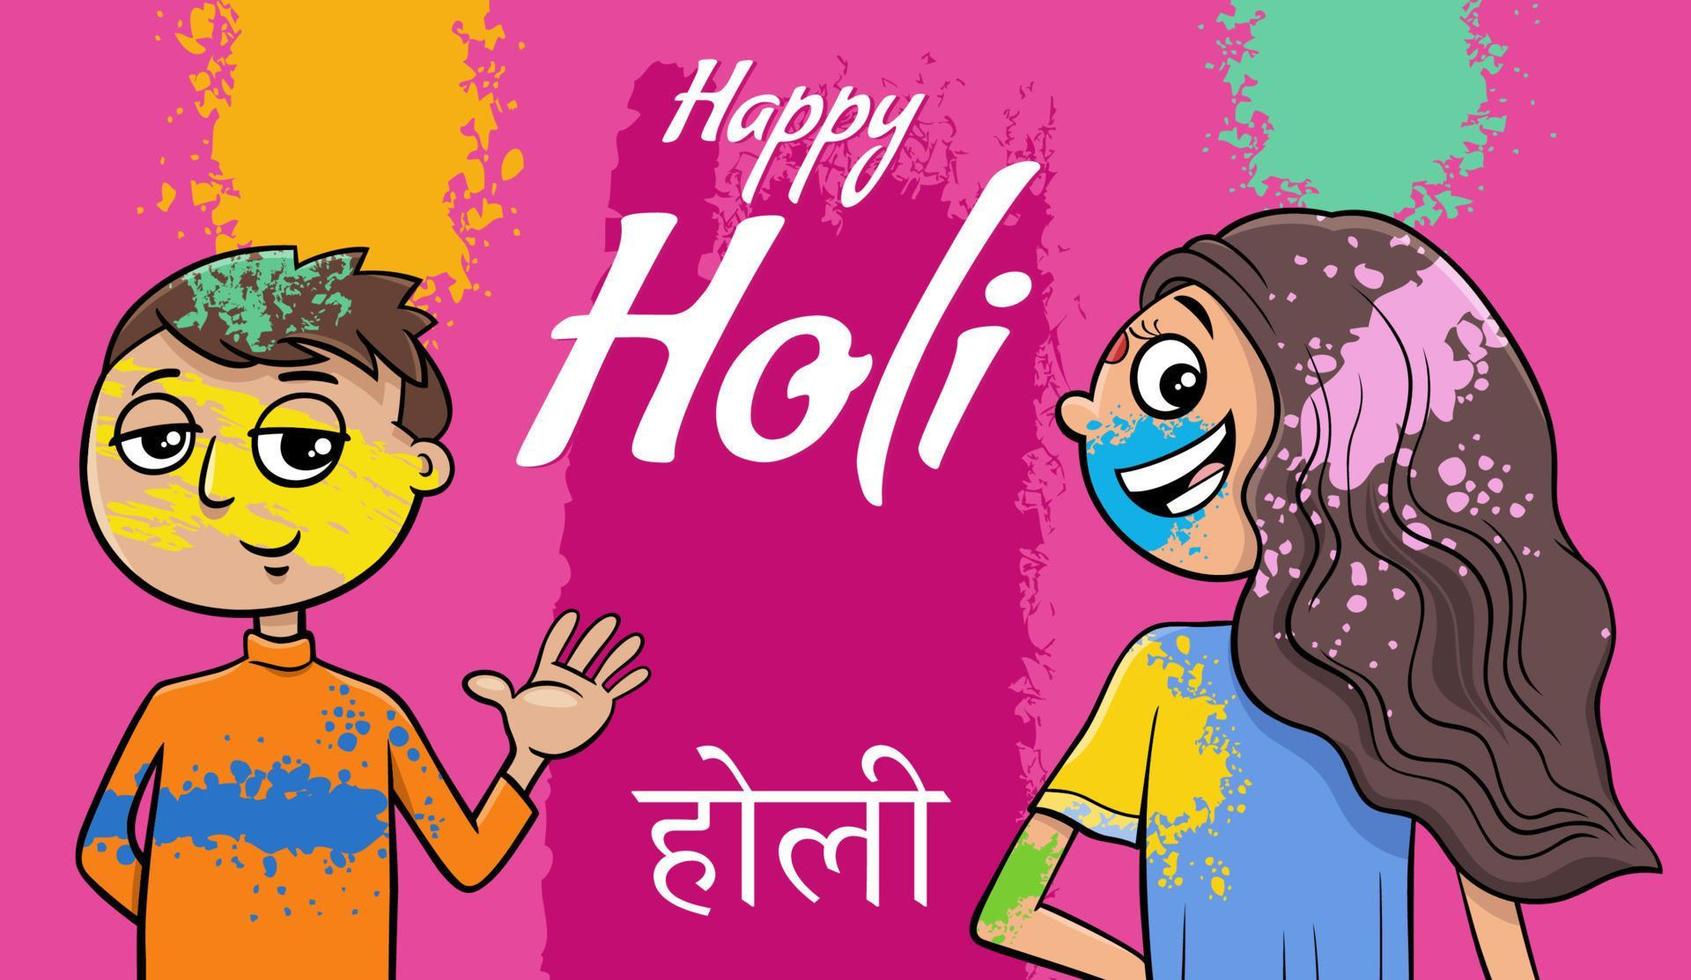 Hindu Holi festival design with comic characters vector